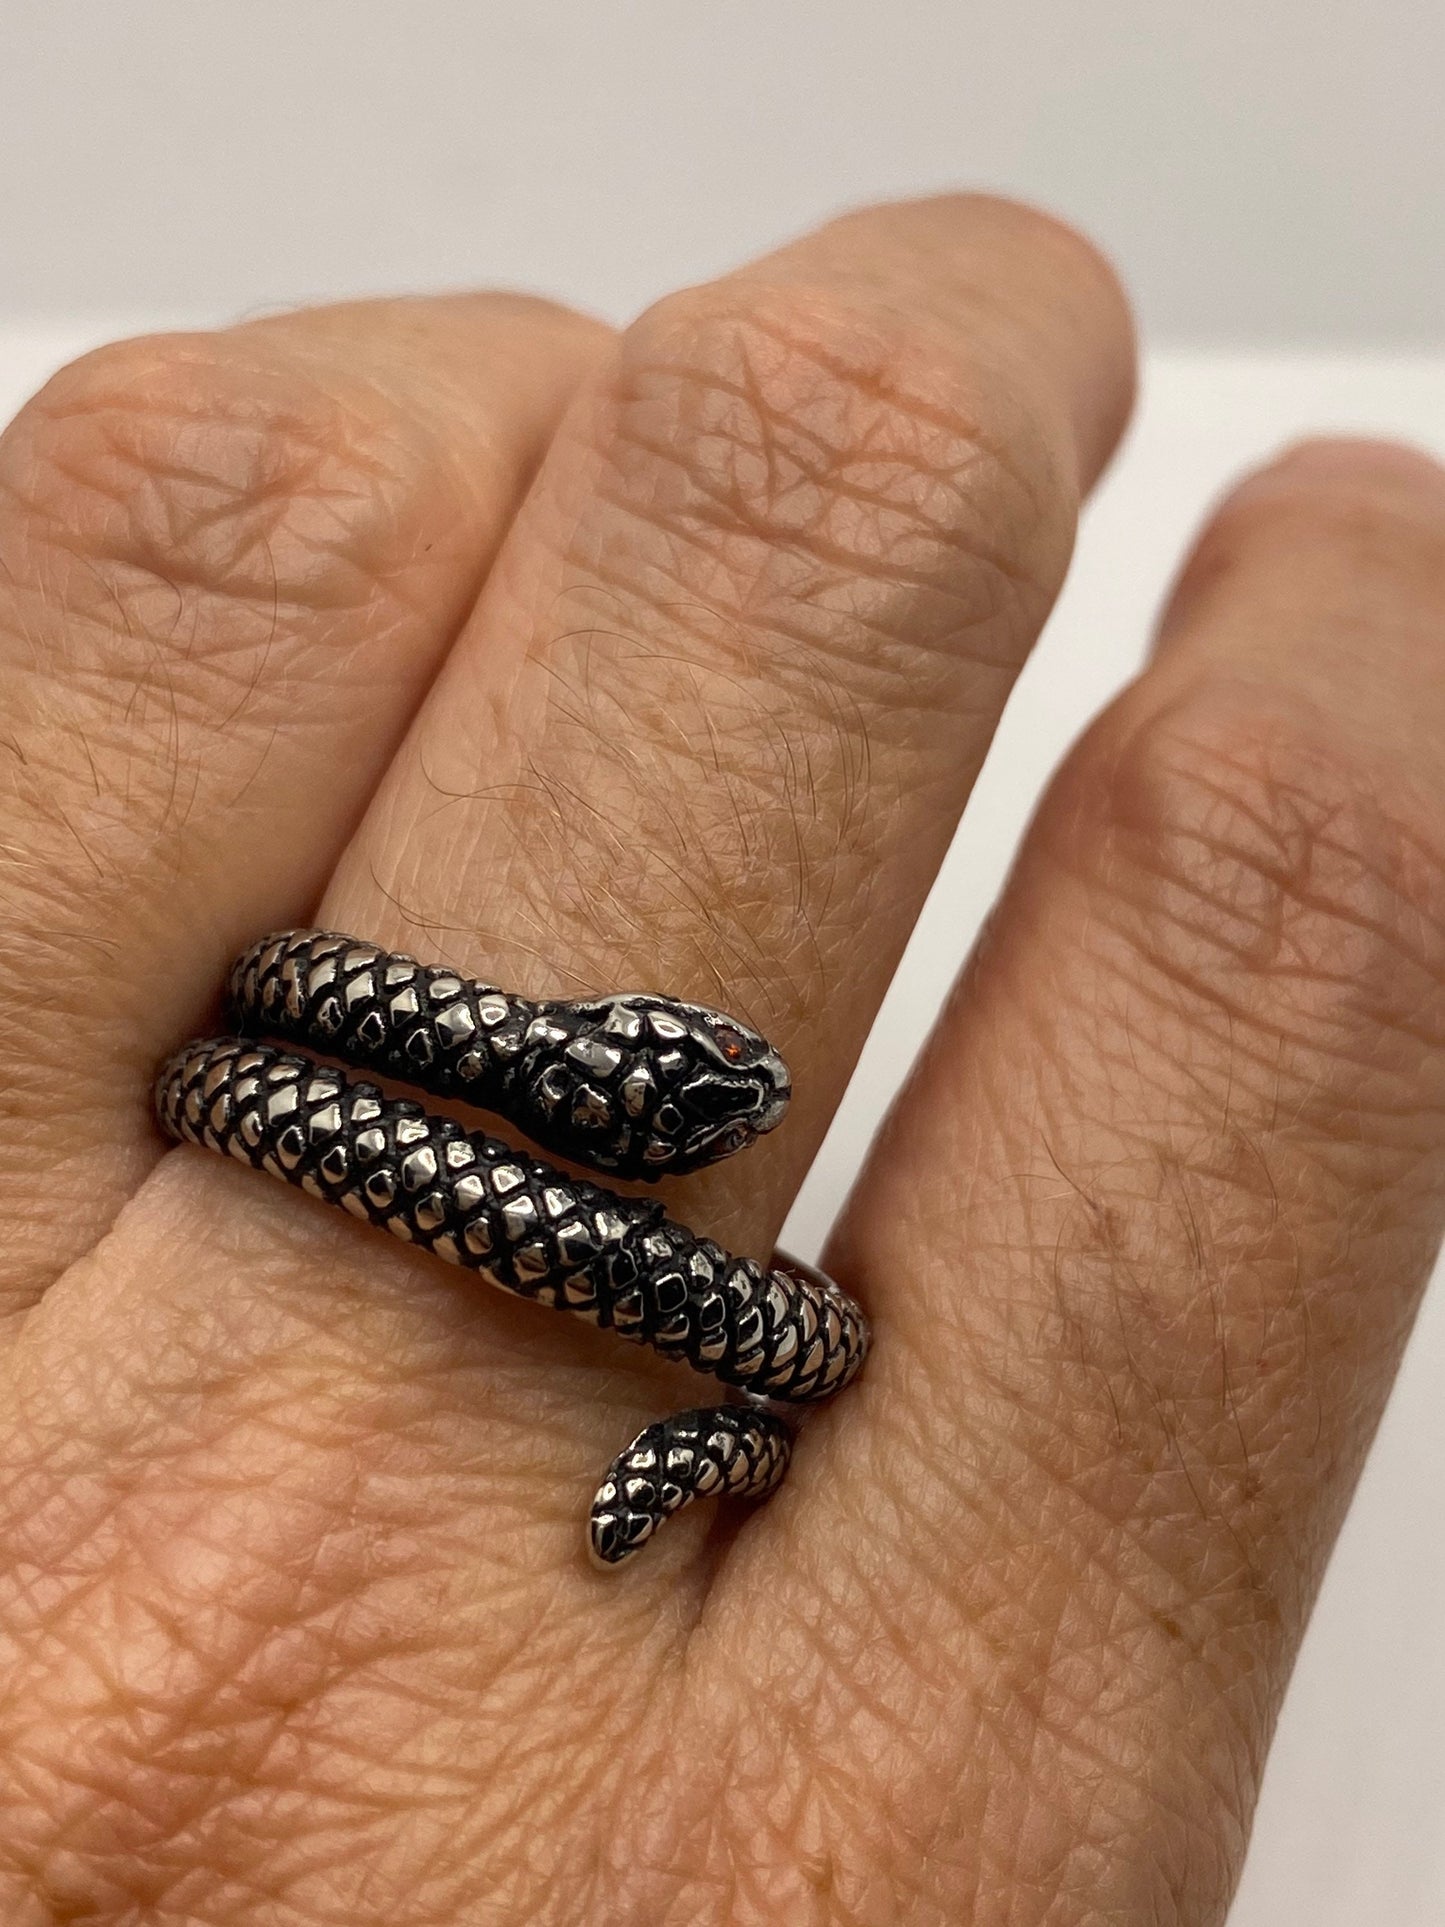 Vintage Gothic Stainless Steel Snake Serpent Mens Ring